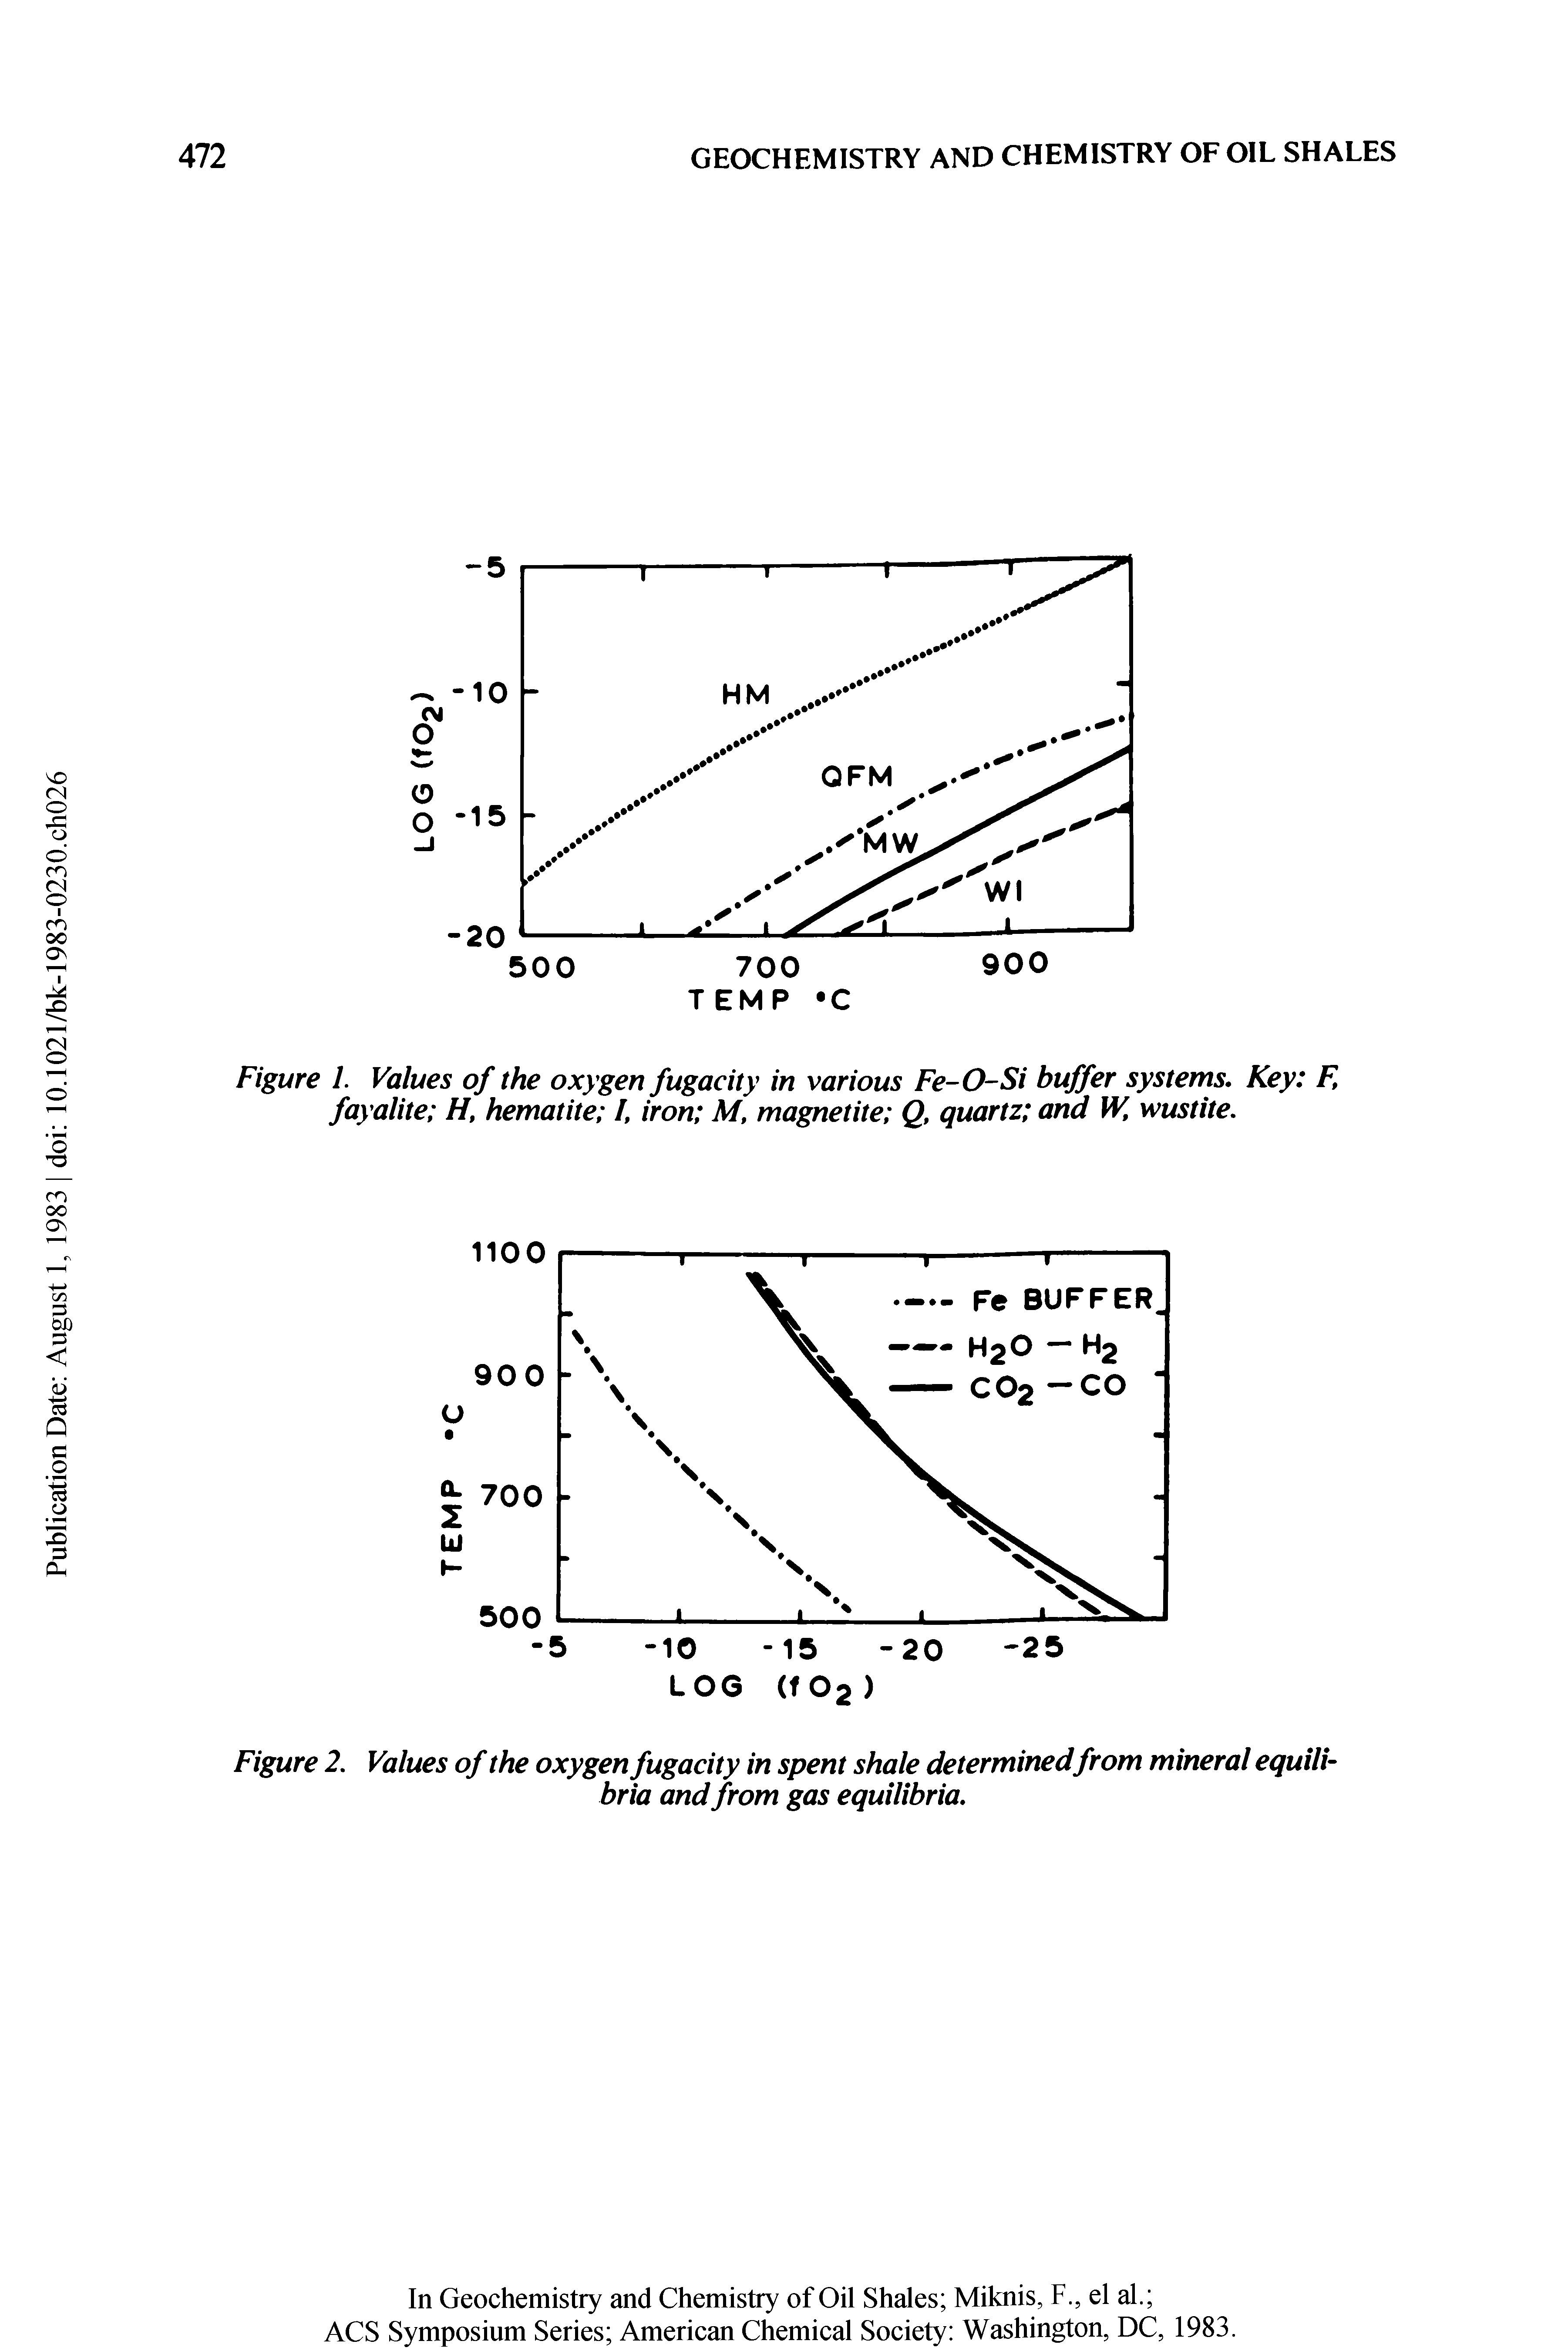 Figure 1. Values of the oxygen fugacity in various Fe-O-Si buffer systems. Key F, fayalite H, hematite I, iron M, magnetite Q, quartz and W, wustite.